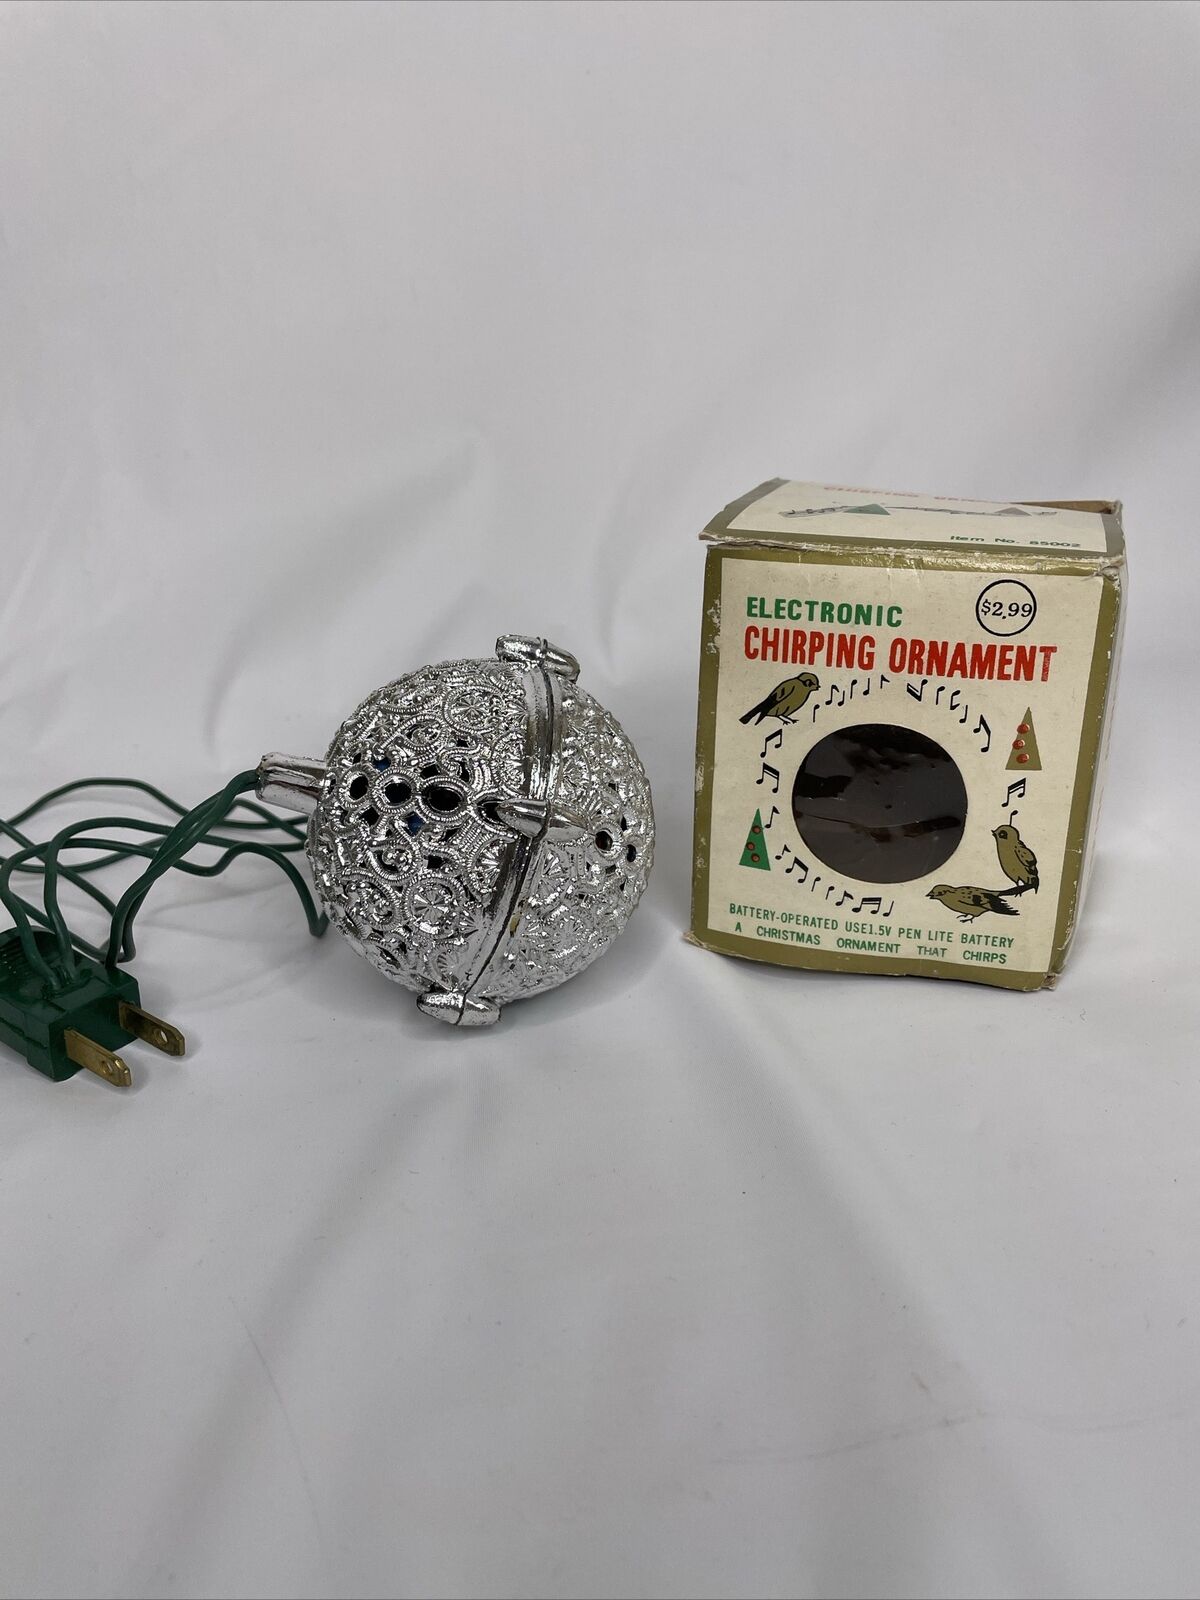 Vintage Silver Filigree Electronic Chirping Bird Christmas Ornament W/Box Works